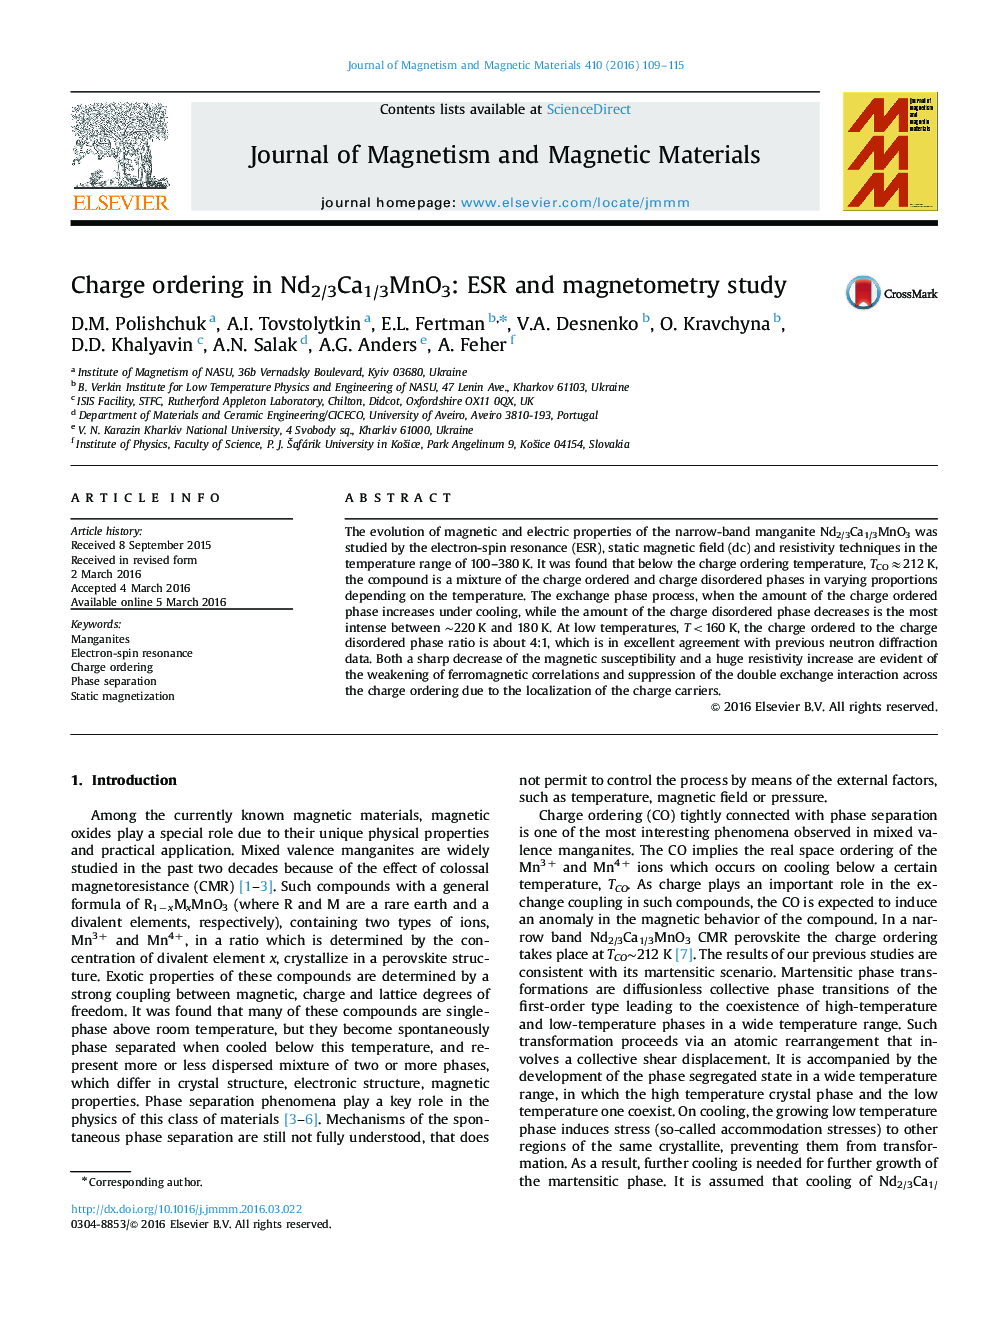 Charge ordering in Nd2/3Ca1/3MnO3: ESR and magnetometry study